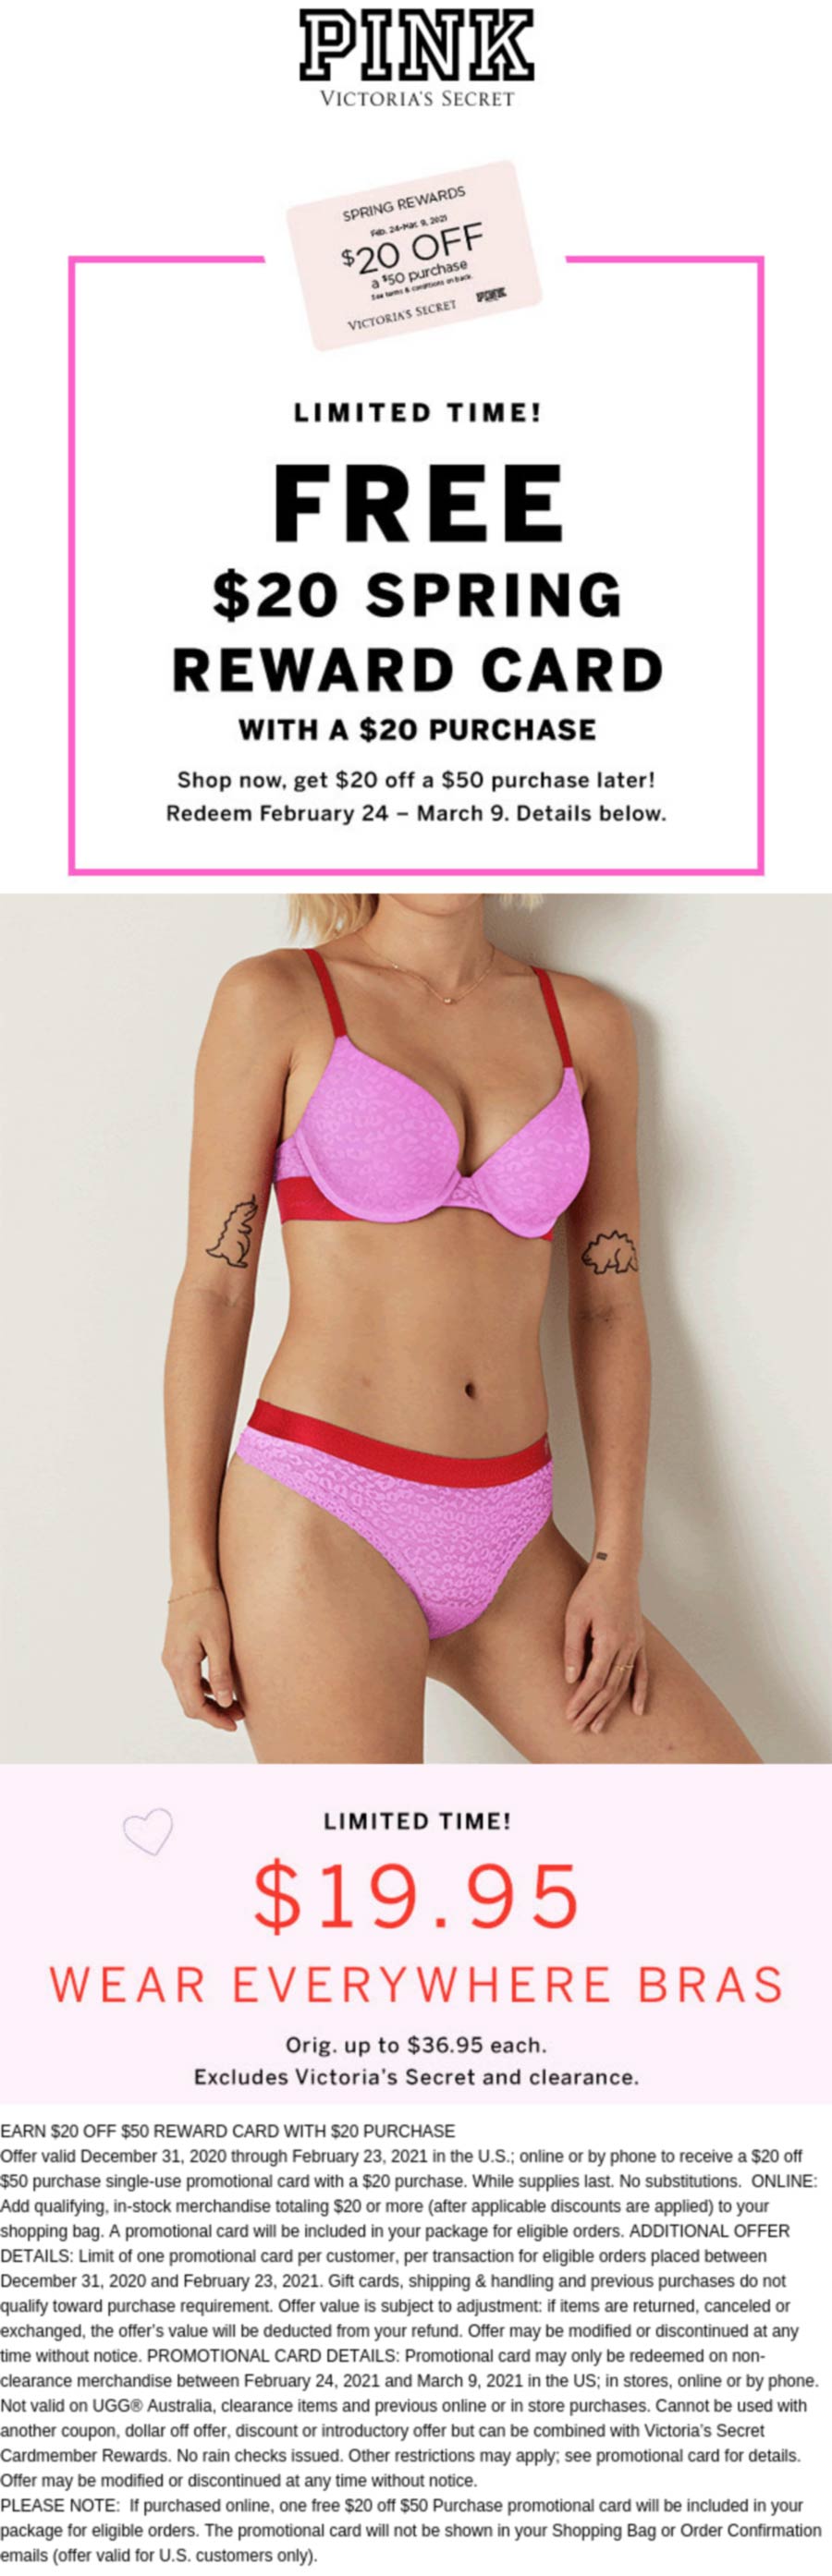 PINK stores Coupon  $20 reward card with $20 spent at Victorias Secret PINK, ditto online #pink 